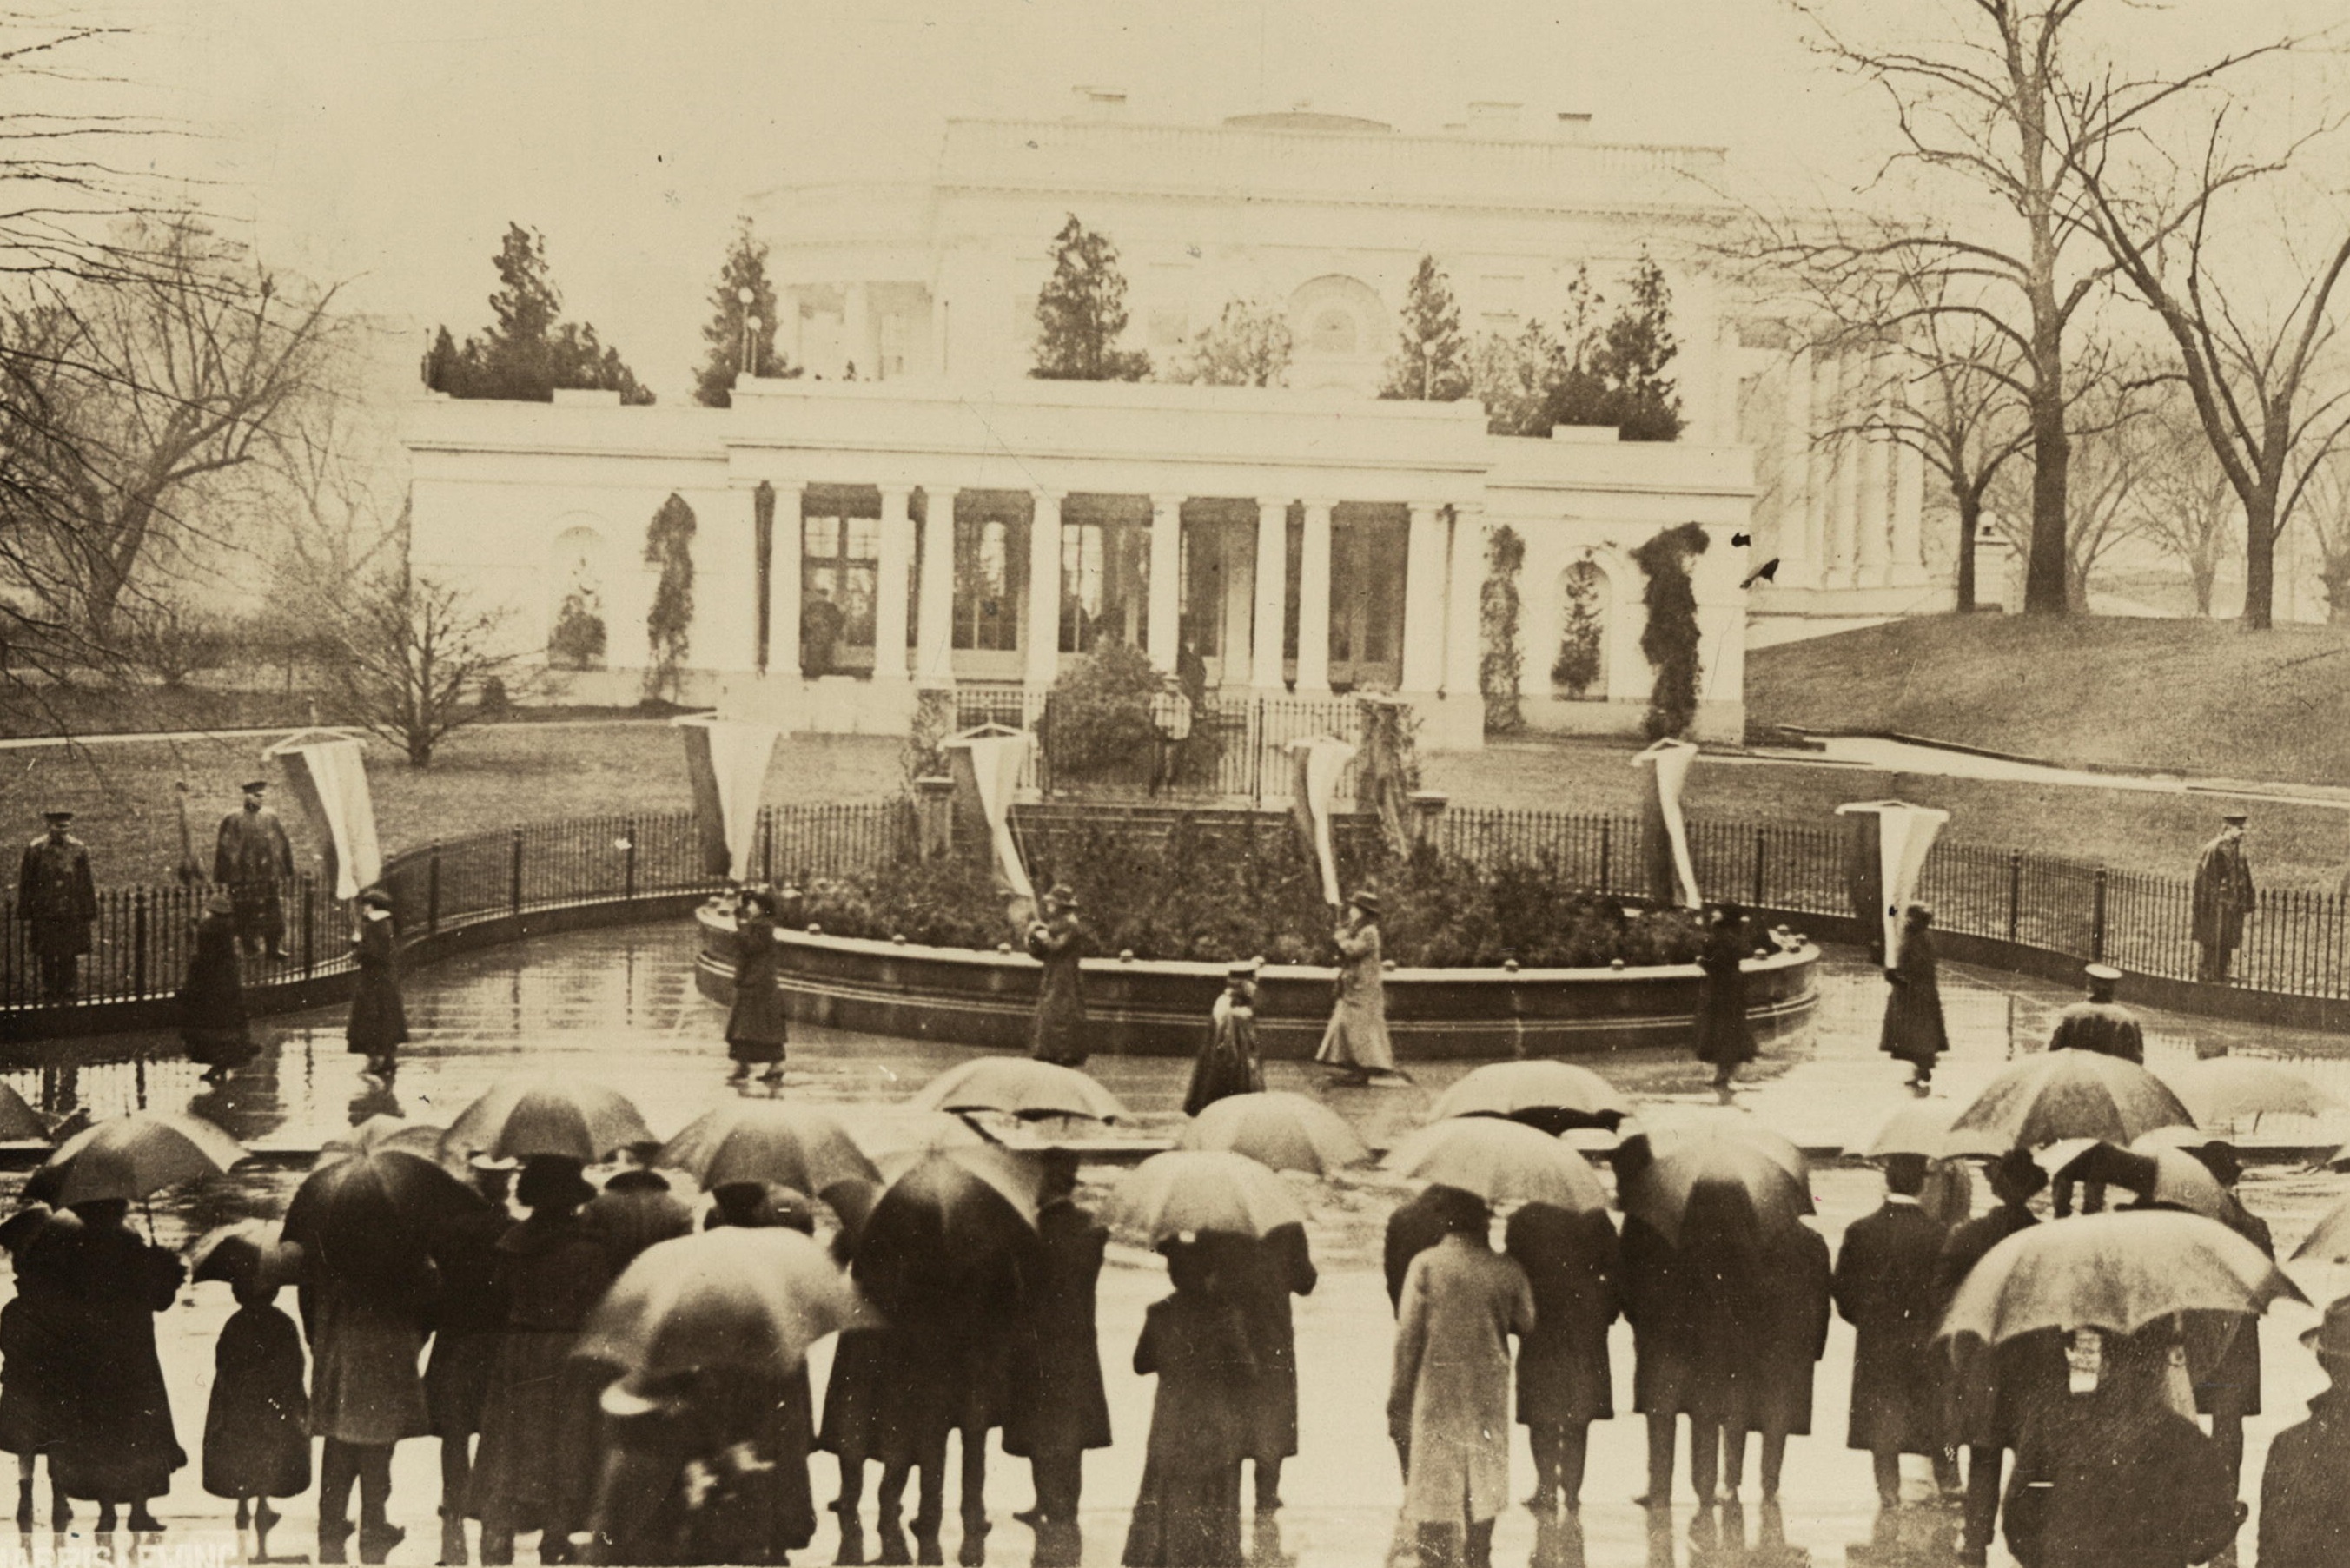 Suffragists picketing Wilson's 1917 Inauguration on the east side of the White House.